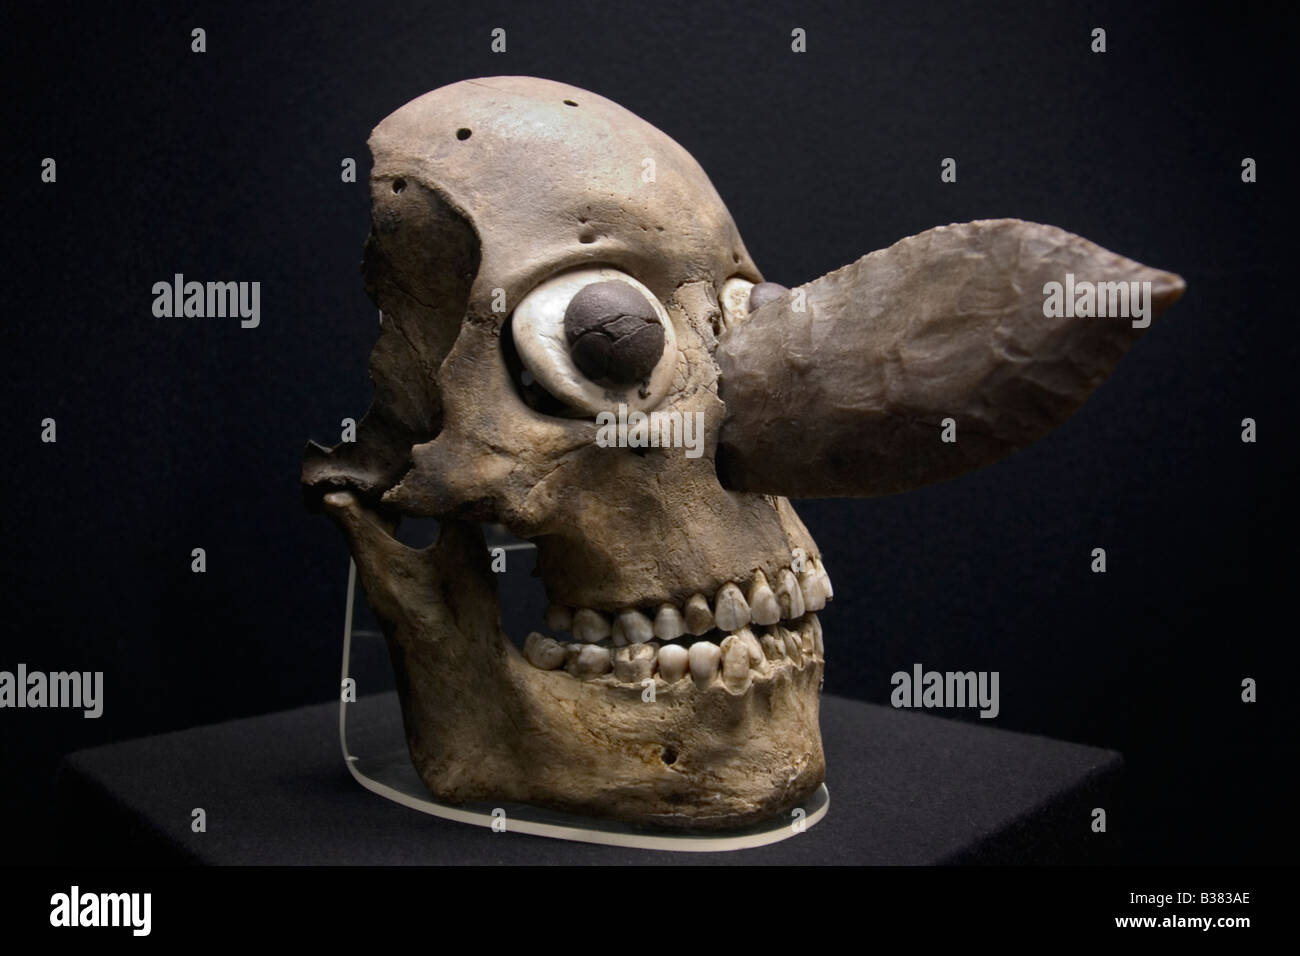 Aztec (Mexica) offering of decorated skull mask made from decapitated slain warrior from the Templo Mayor Museum in Mexico City. Stock Photo